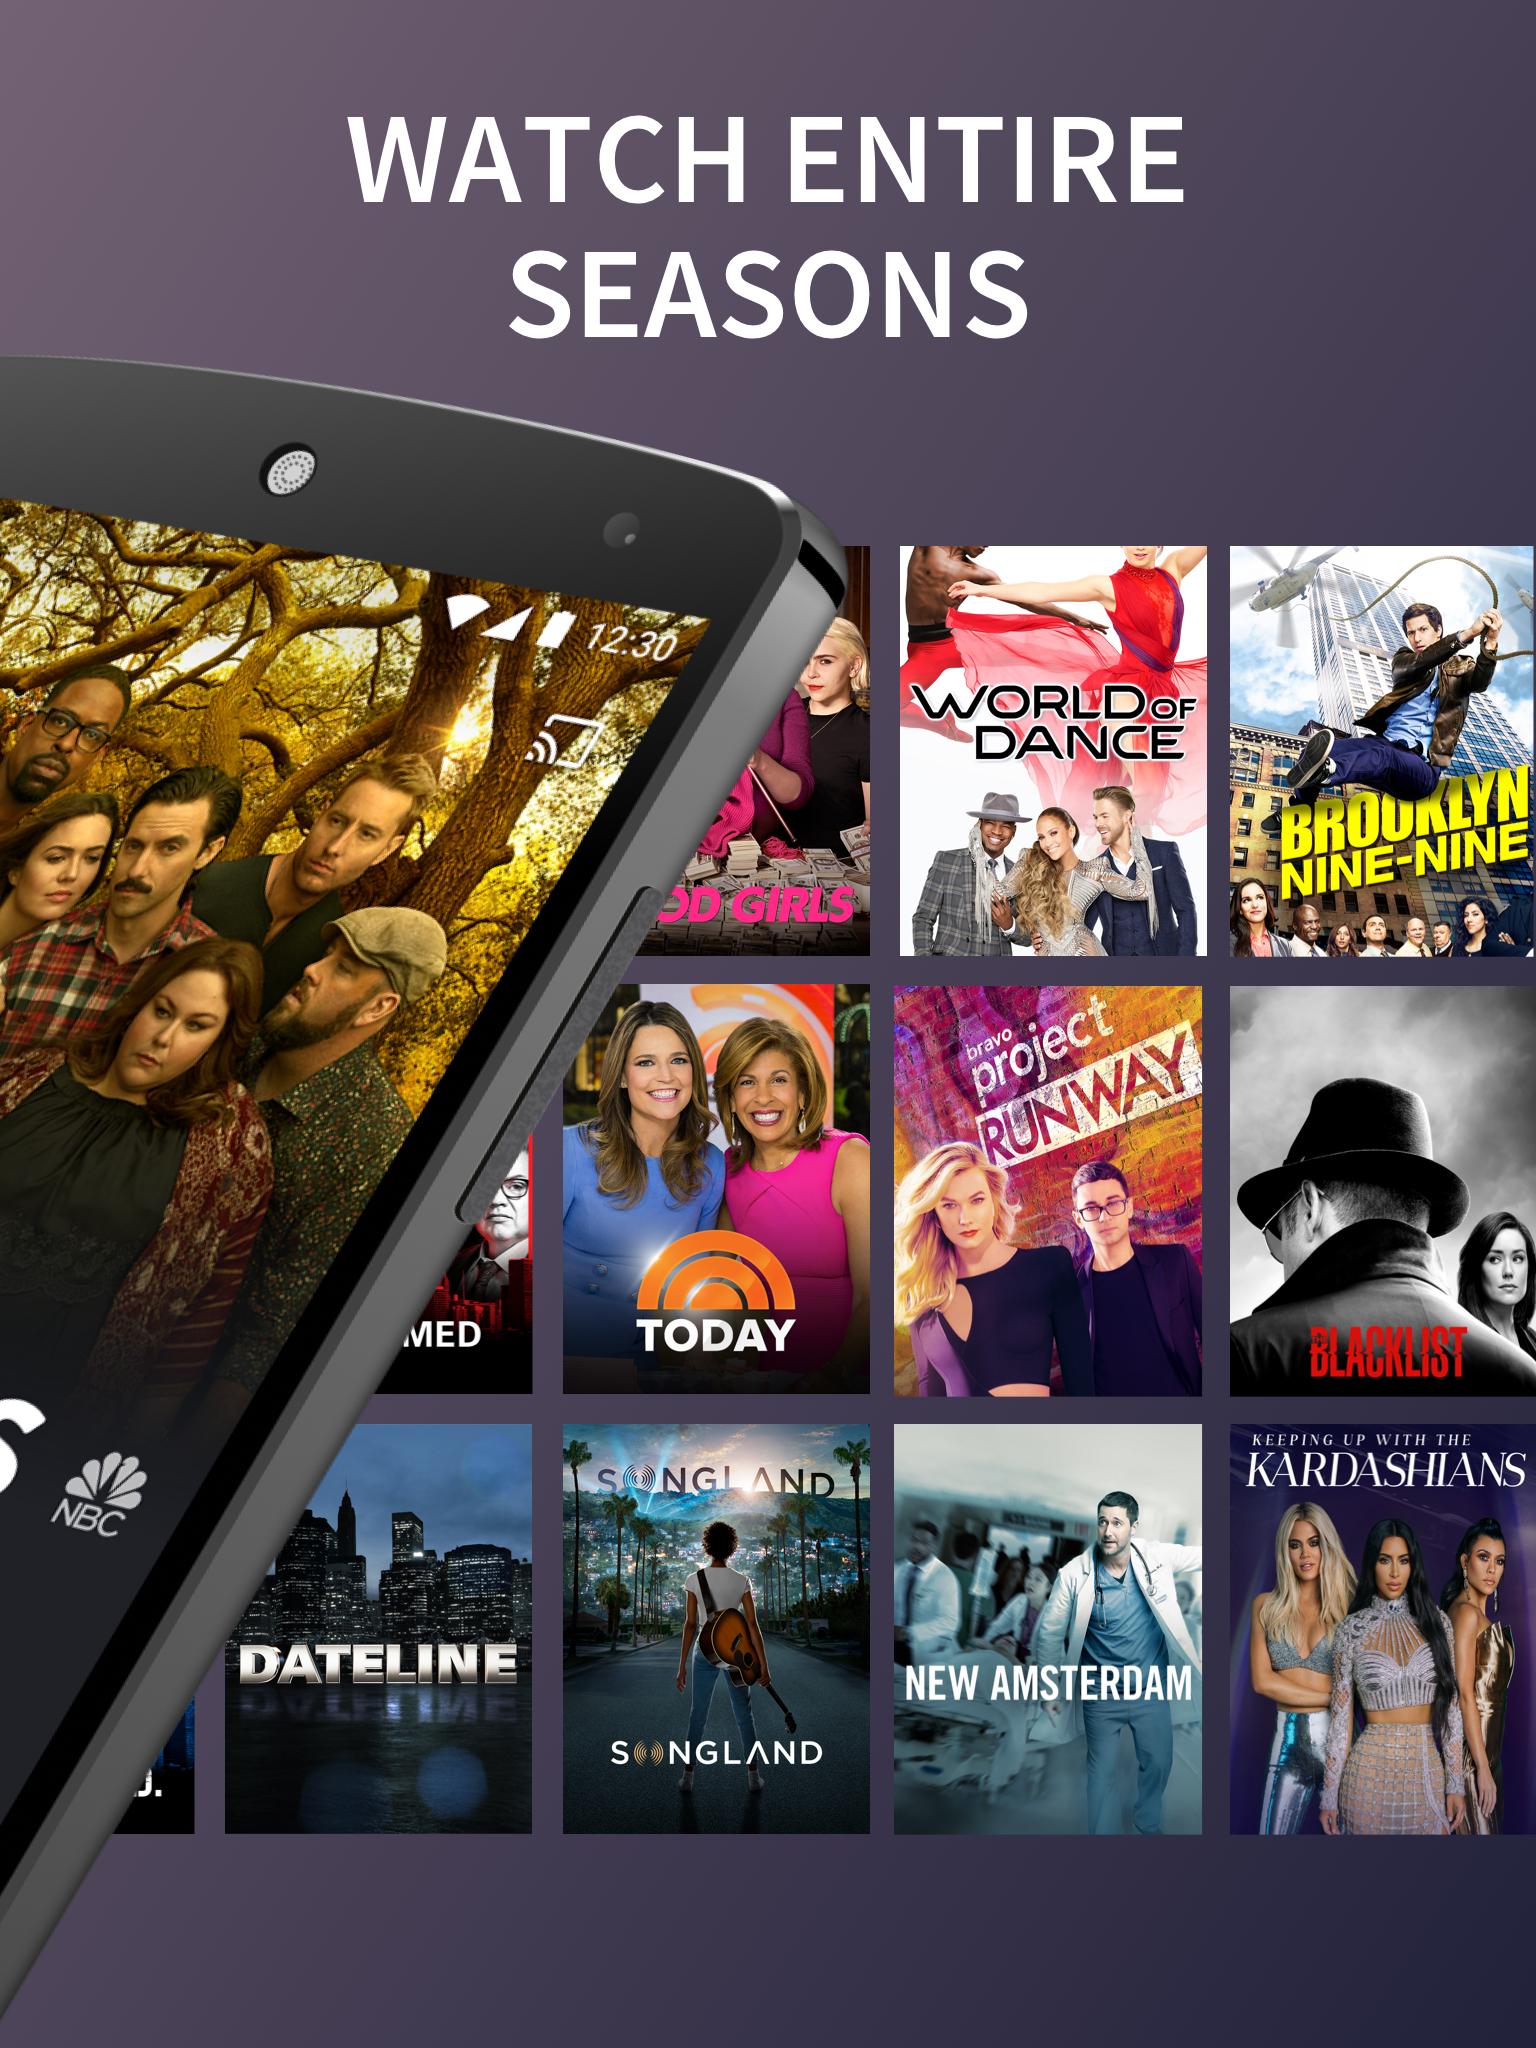 The NBC App - Stream Live TV and Episodes for Free 7.4.1 Screenshot 7